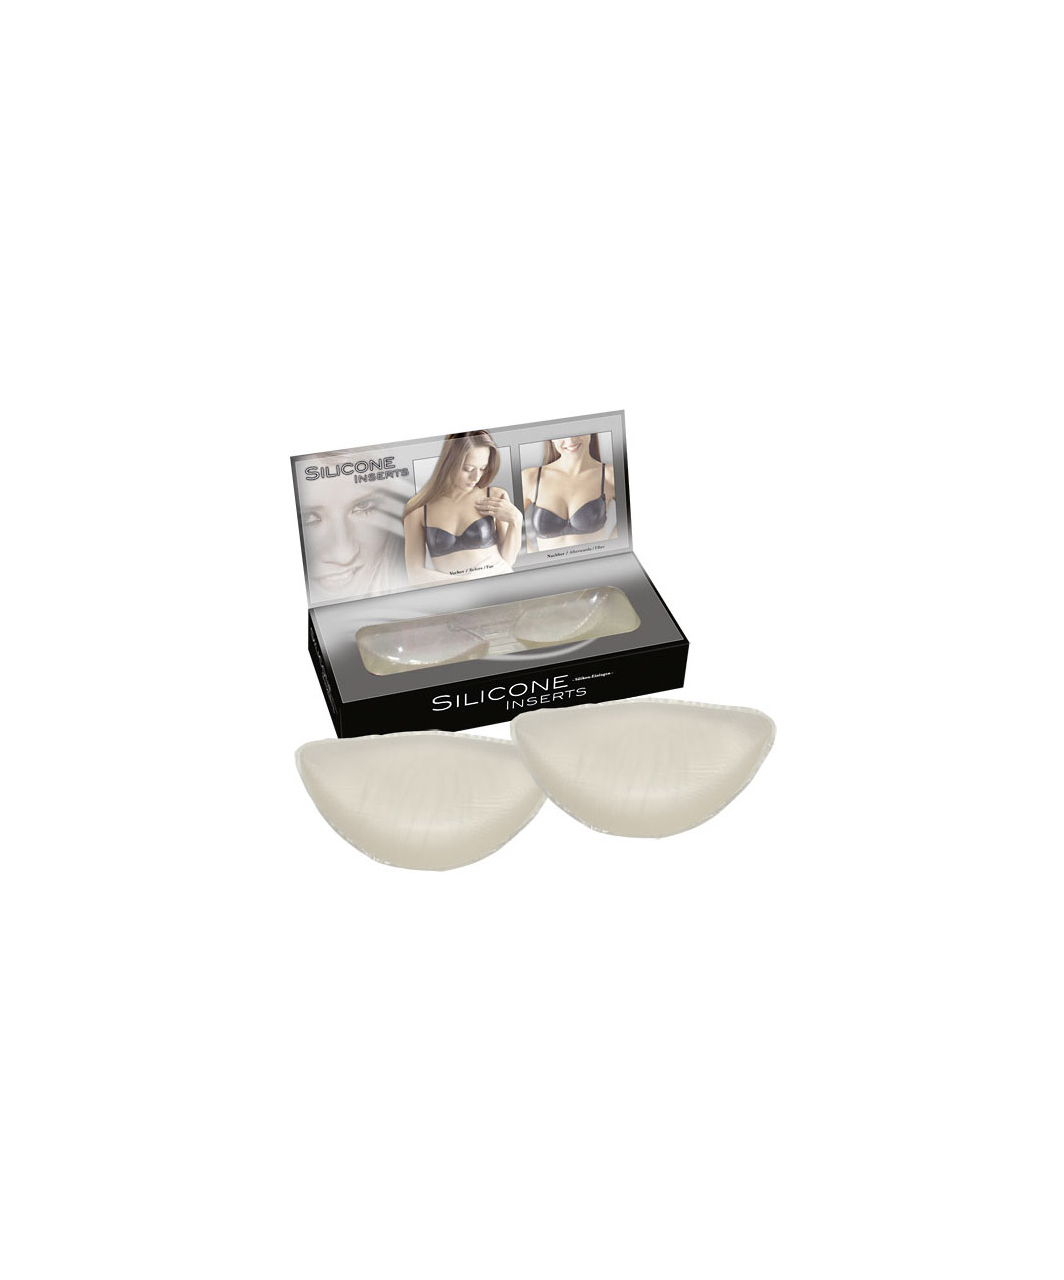 Cottelli Lingerie Silicone Pads